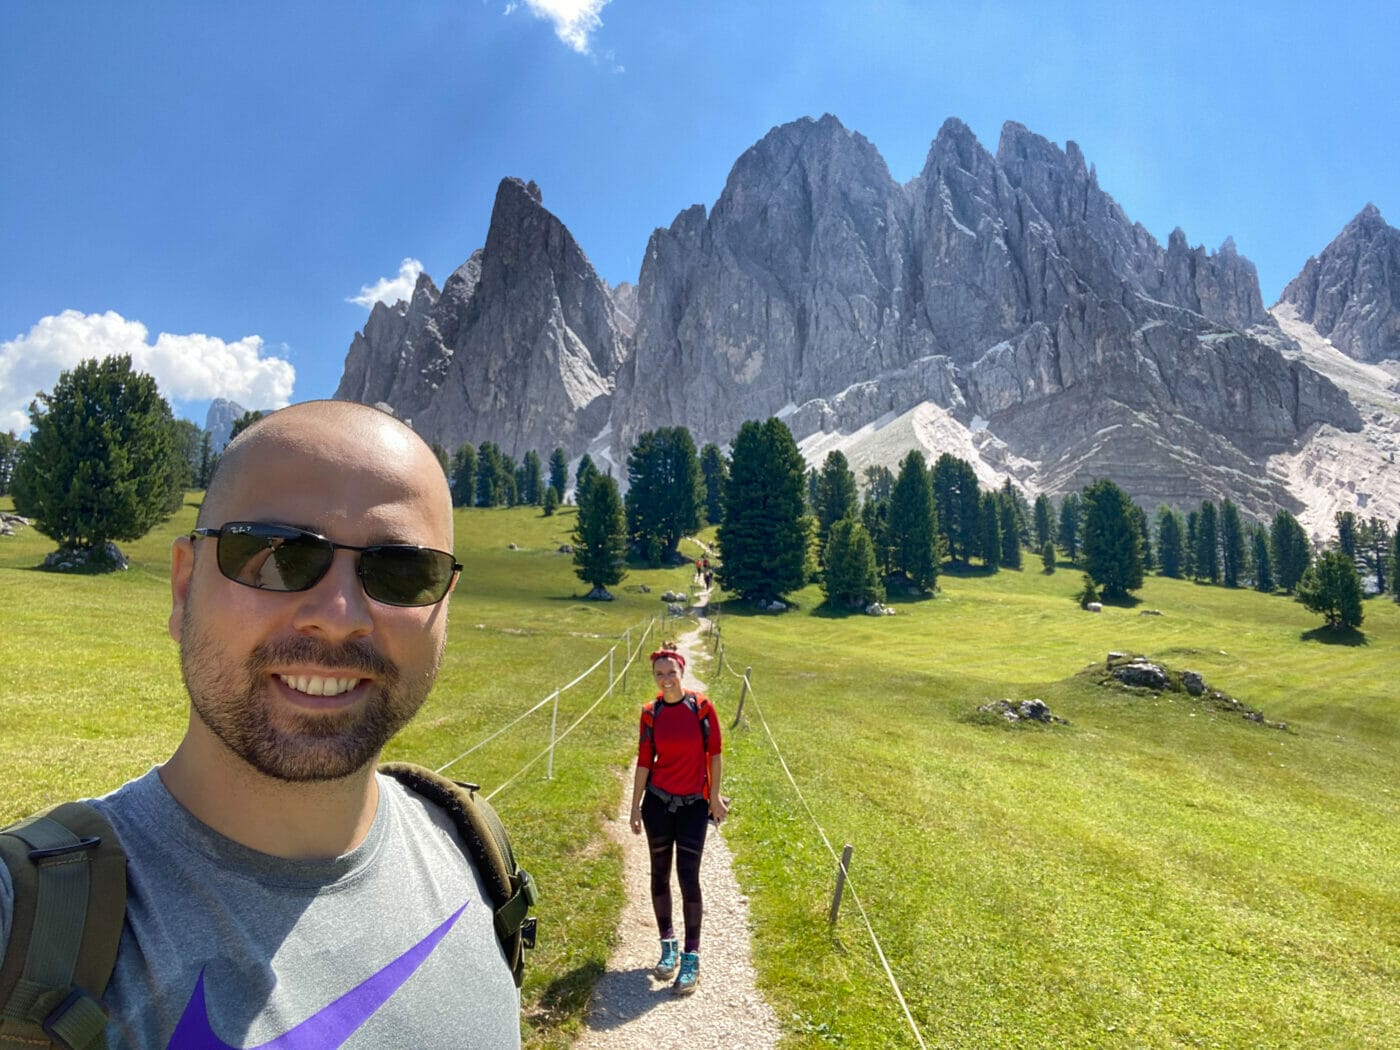 Two hikers posing for a selfie on a footpath with the glorious Odle mountains in the background in the Italian Dolomites.